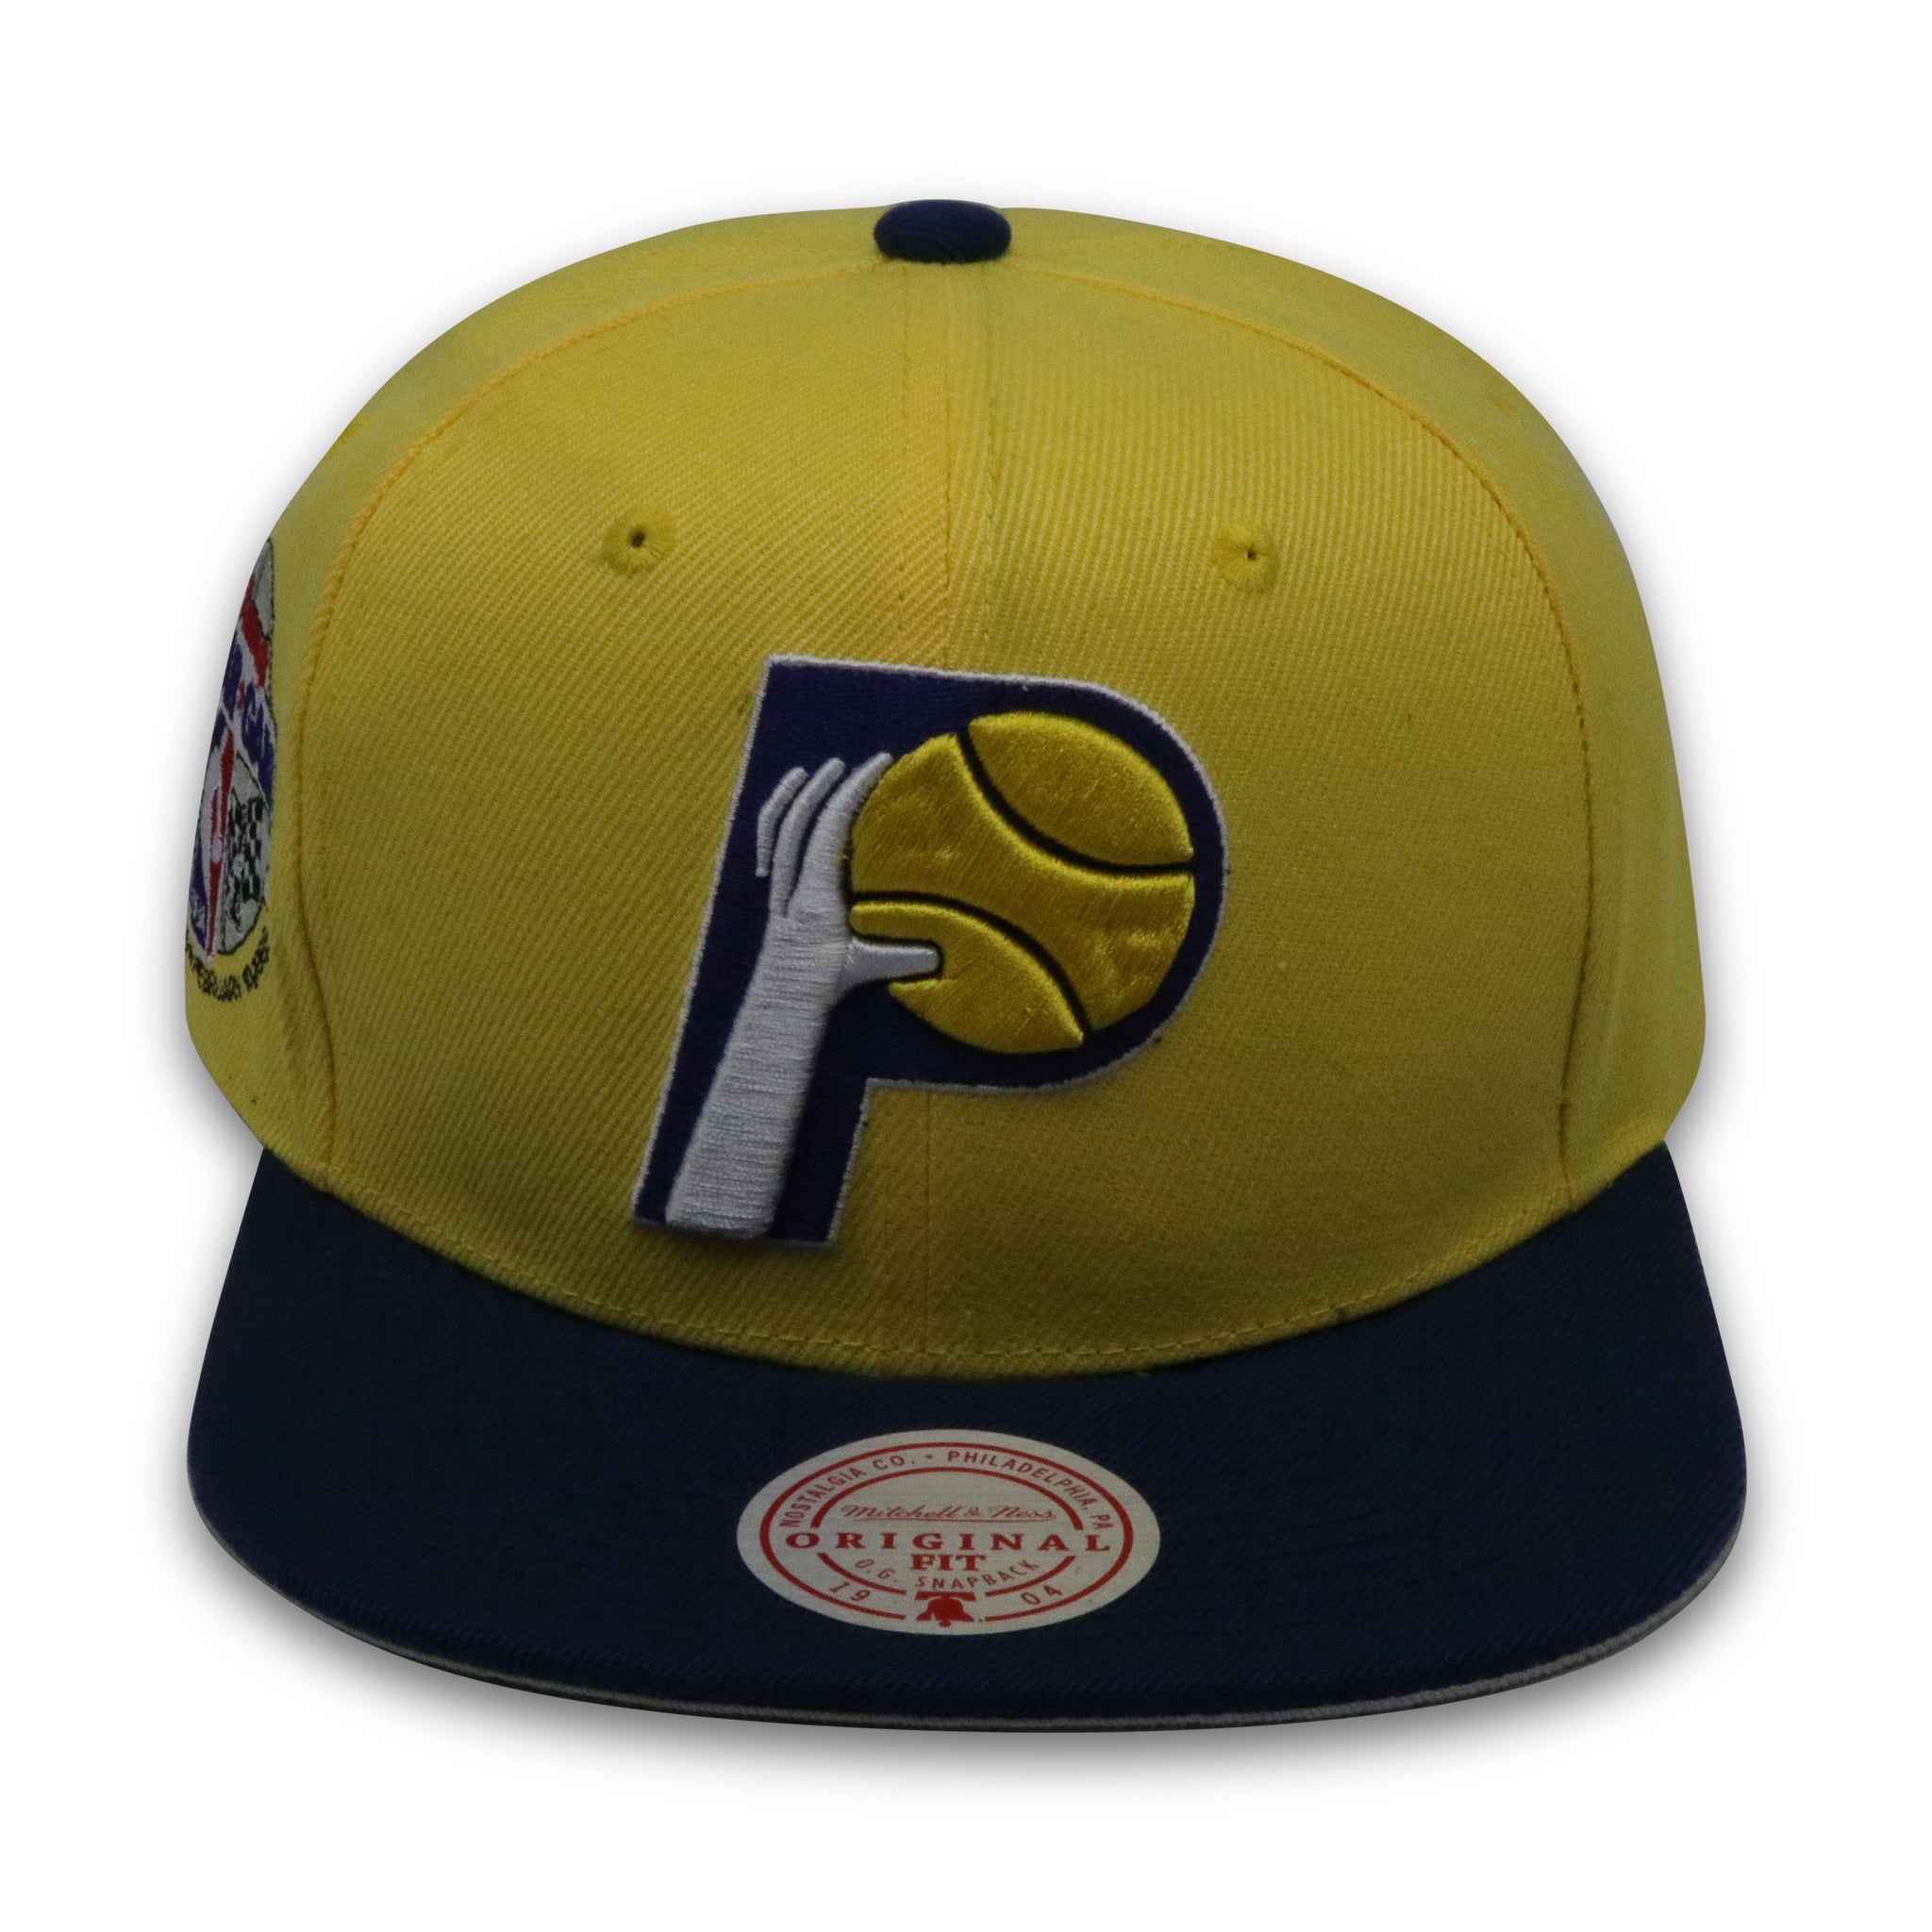 INDIANA PACERS (1985 ALLSTARGAME) MITCHELL & NESS SNAPBACK (SH21477)